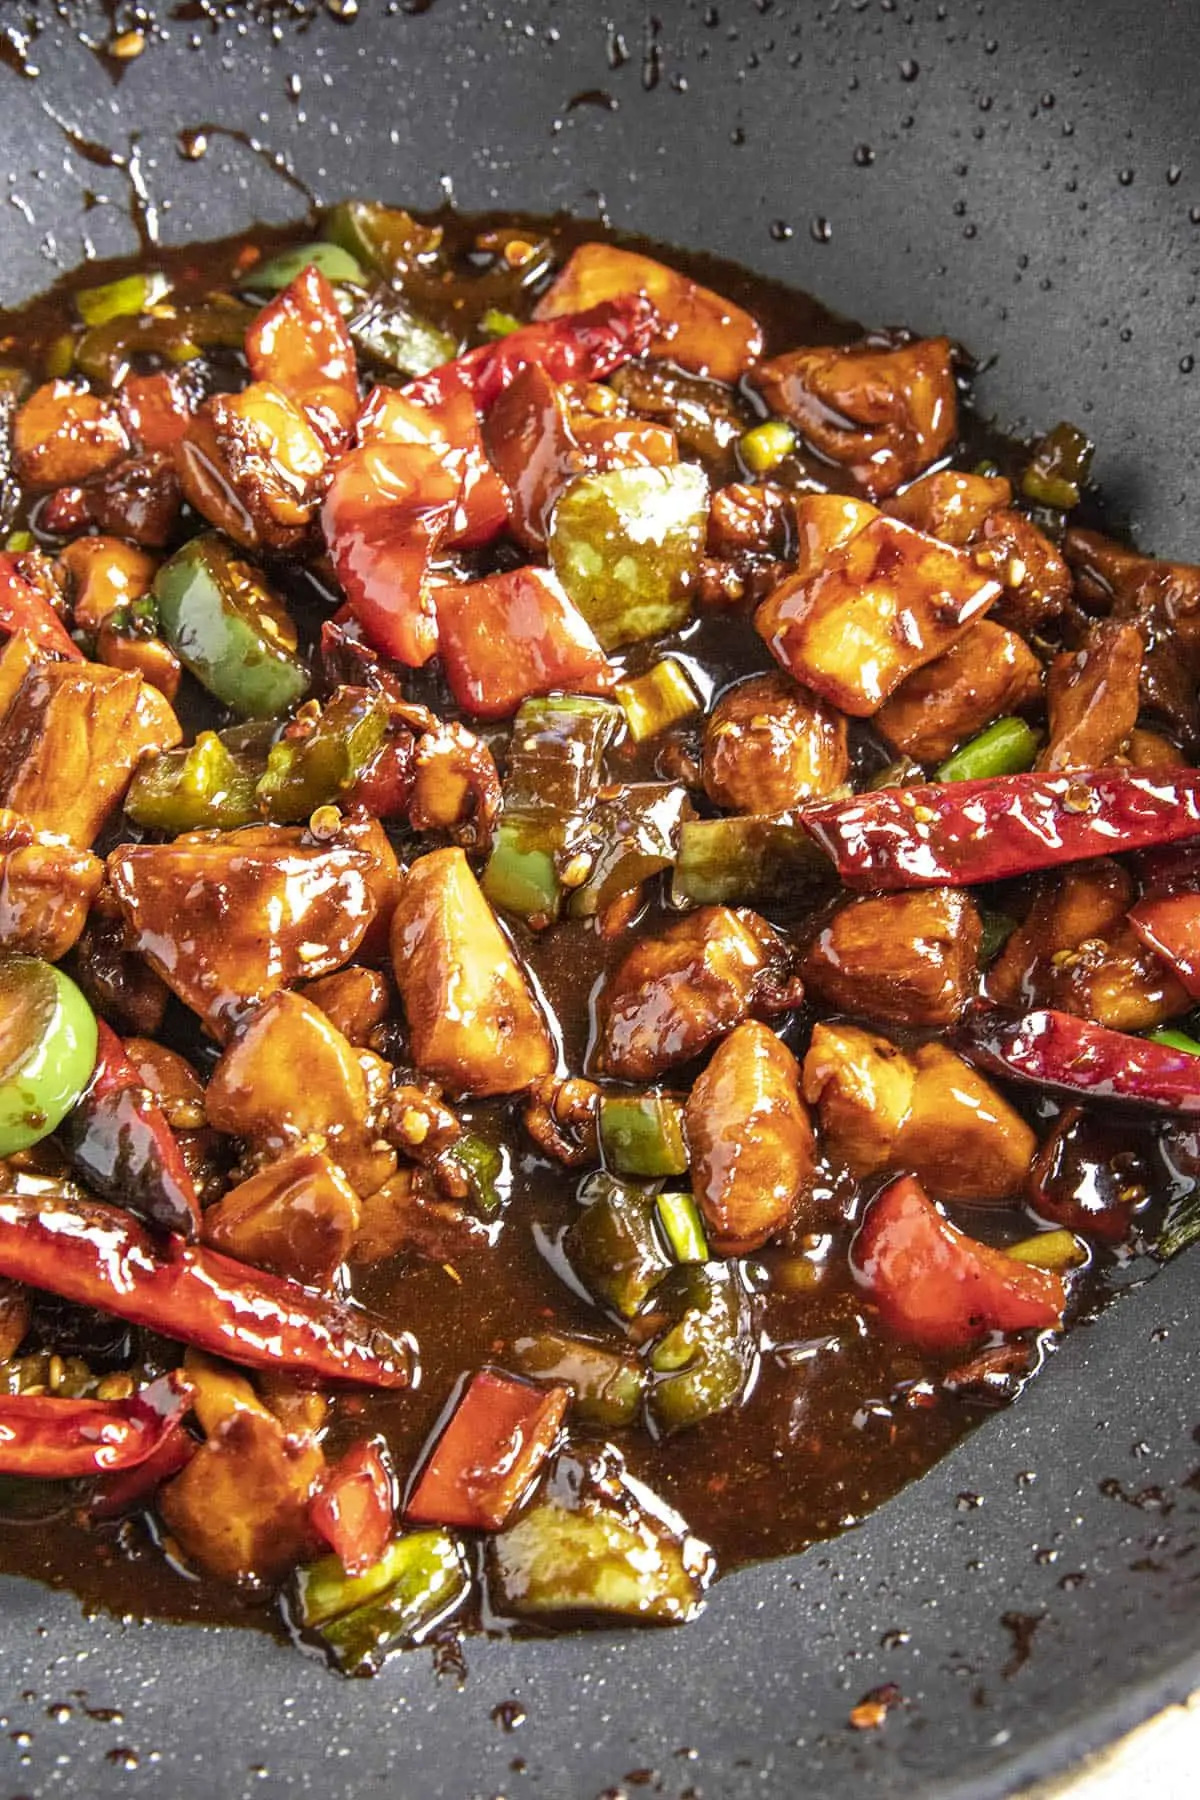 Simmering the Kung Pao Chicken in a pan with sauce